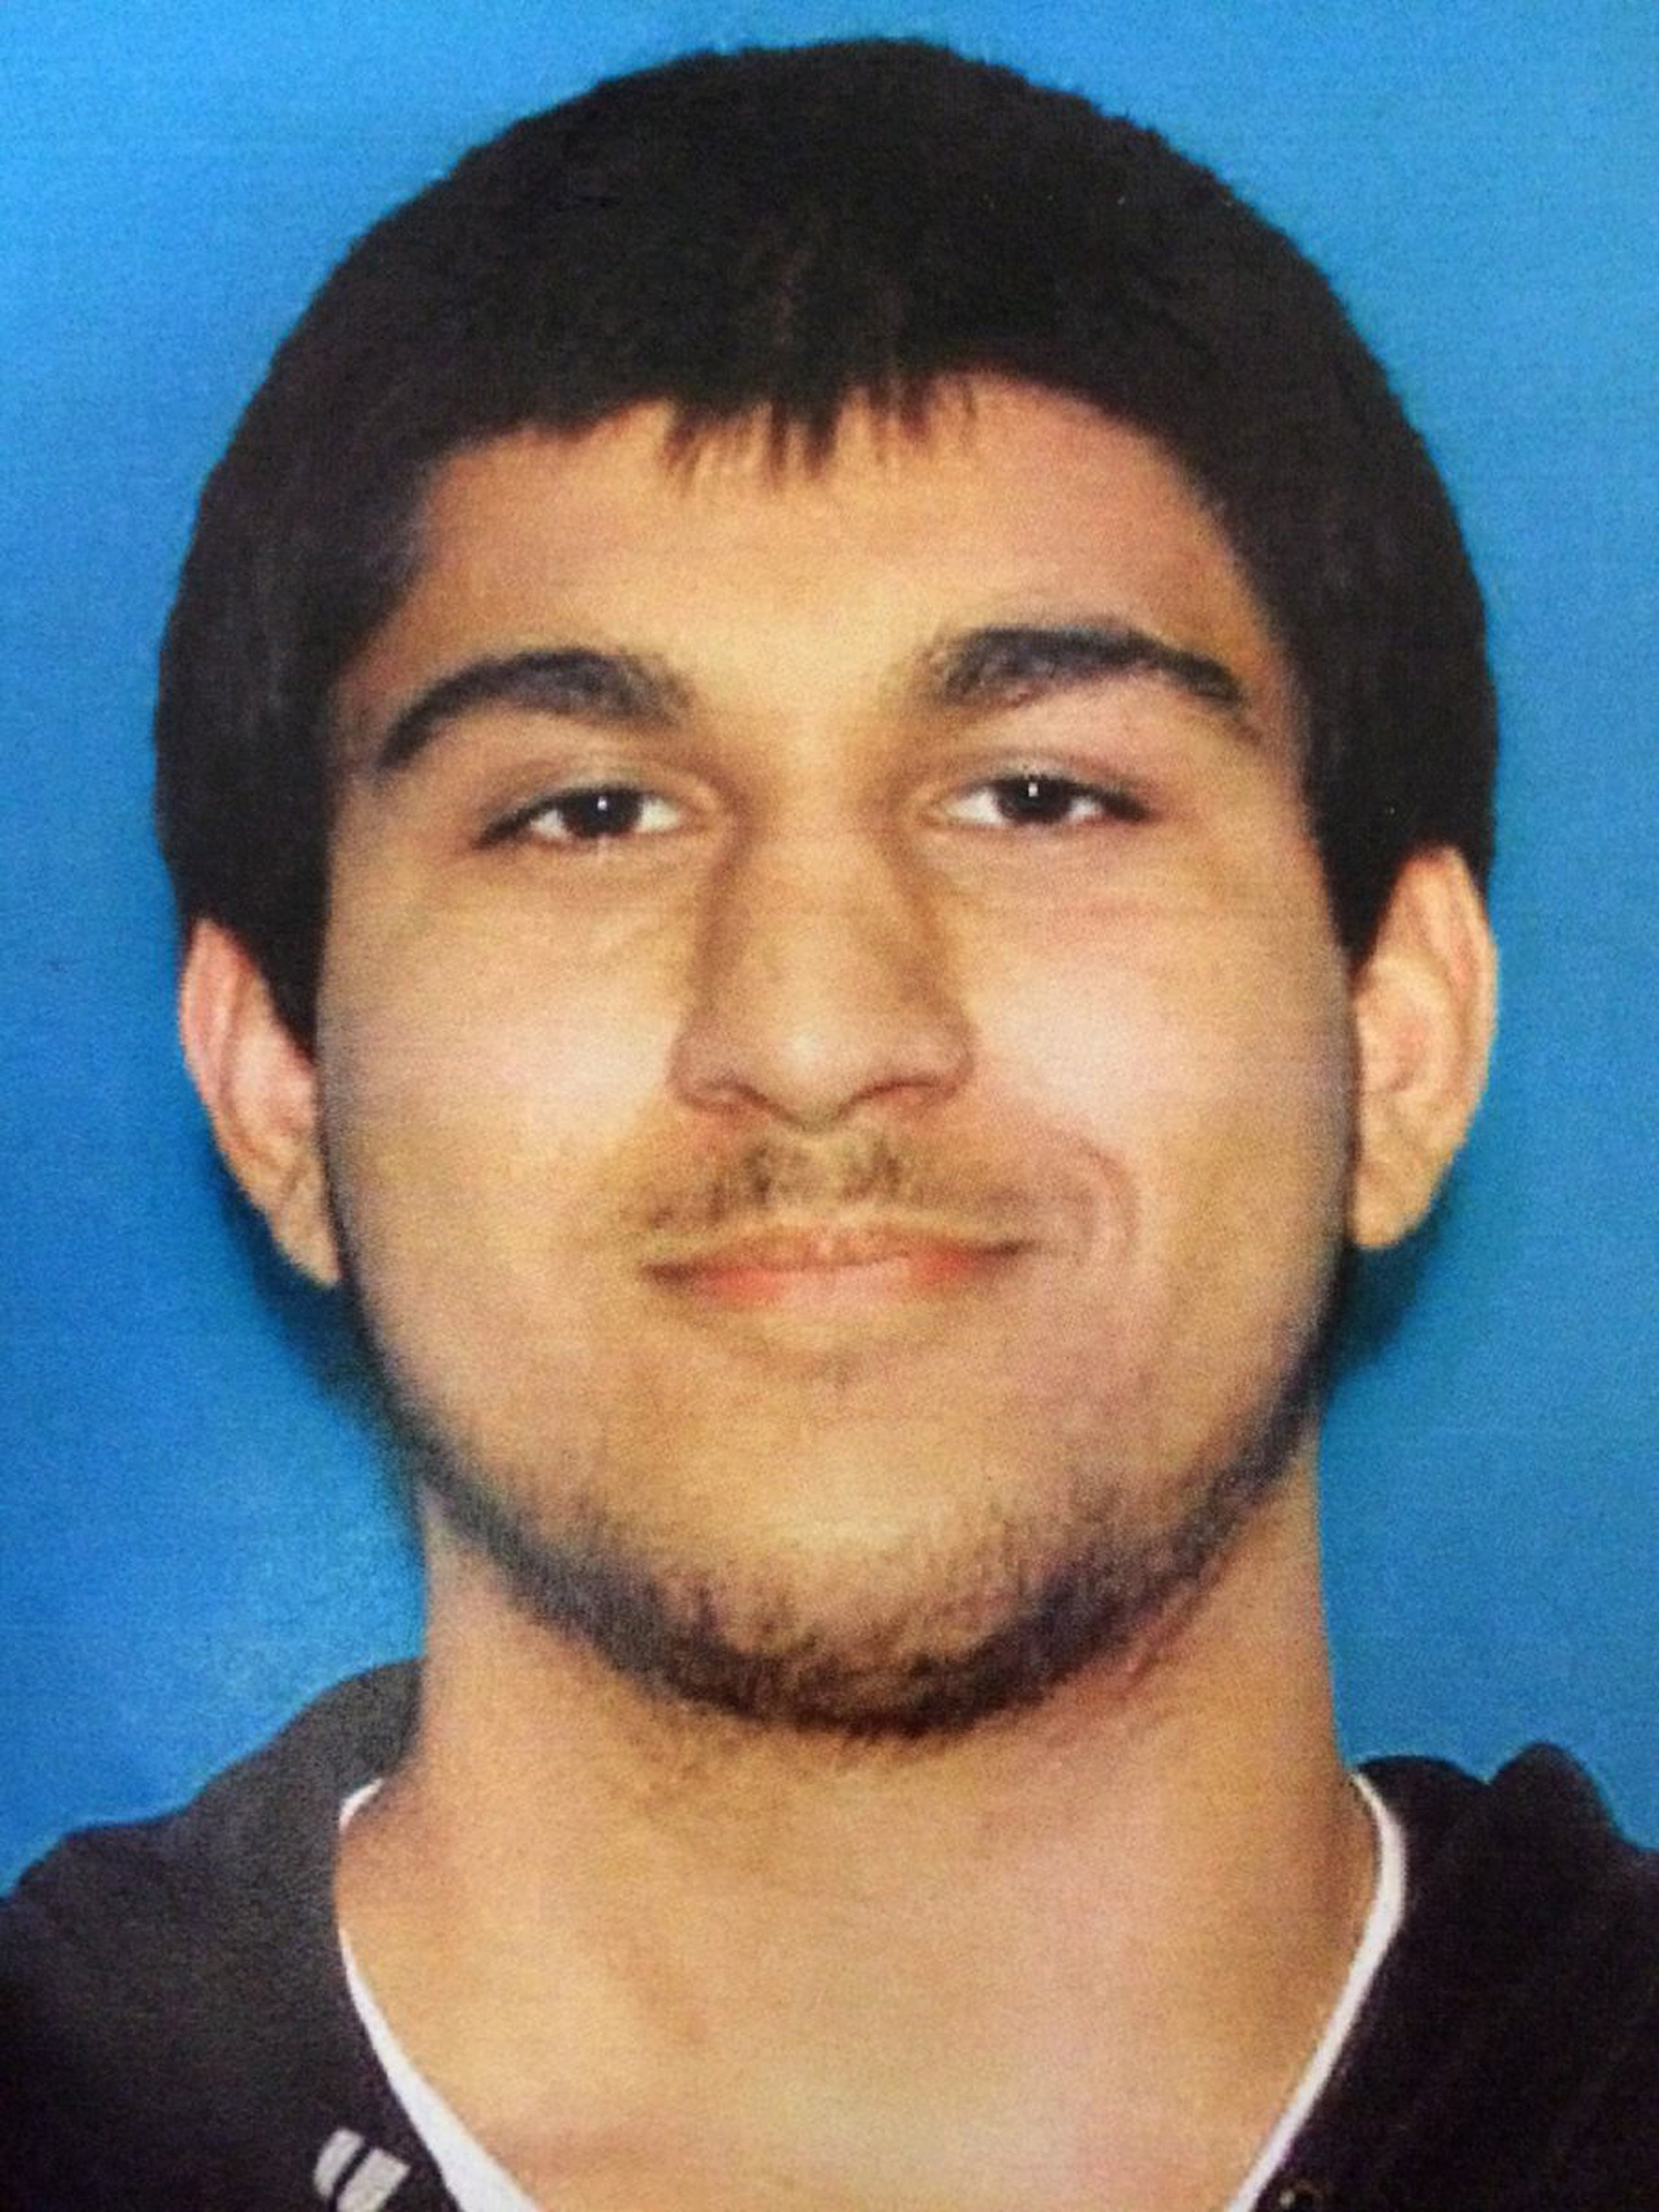 This undated Department of Licensing photo posted Saturday, Sept. 24, 2016, by the Washington State Patrol on its Twitter page shows Arcan Cetin, 20, of Oak Harbor, Wash. Patrol Sgt. (Washington State Patrol via AP)